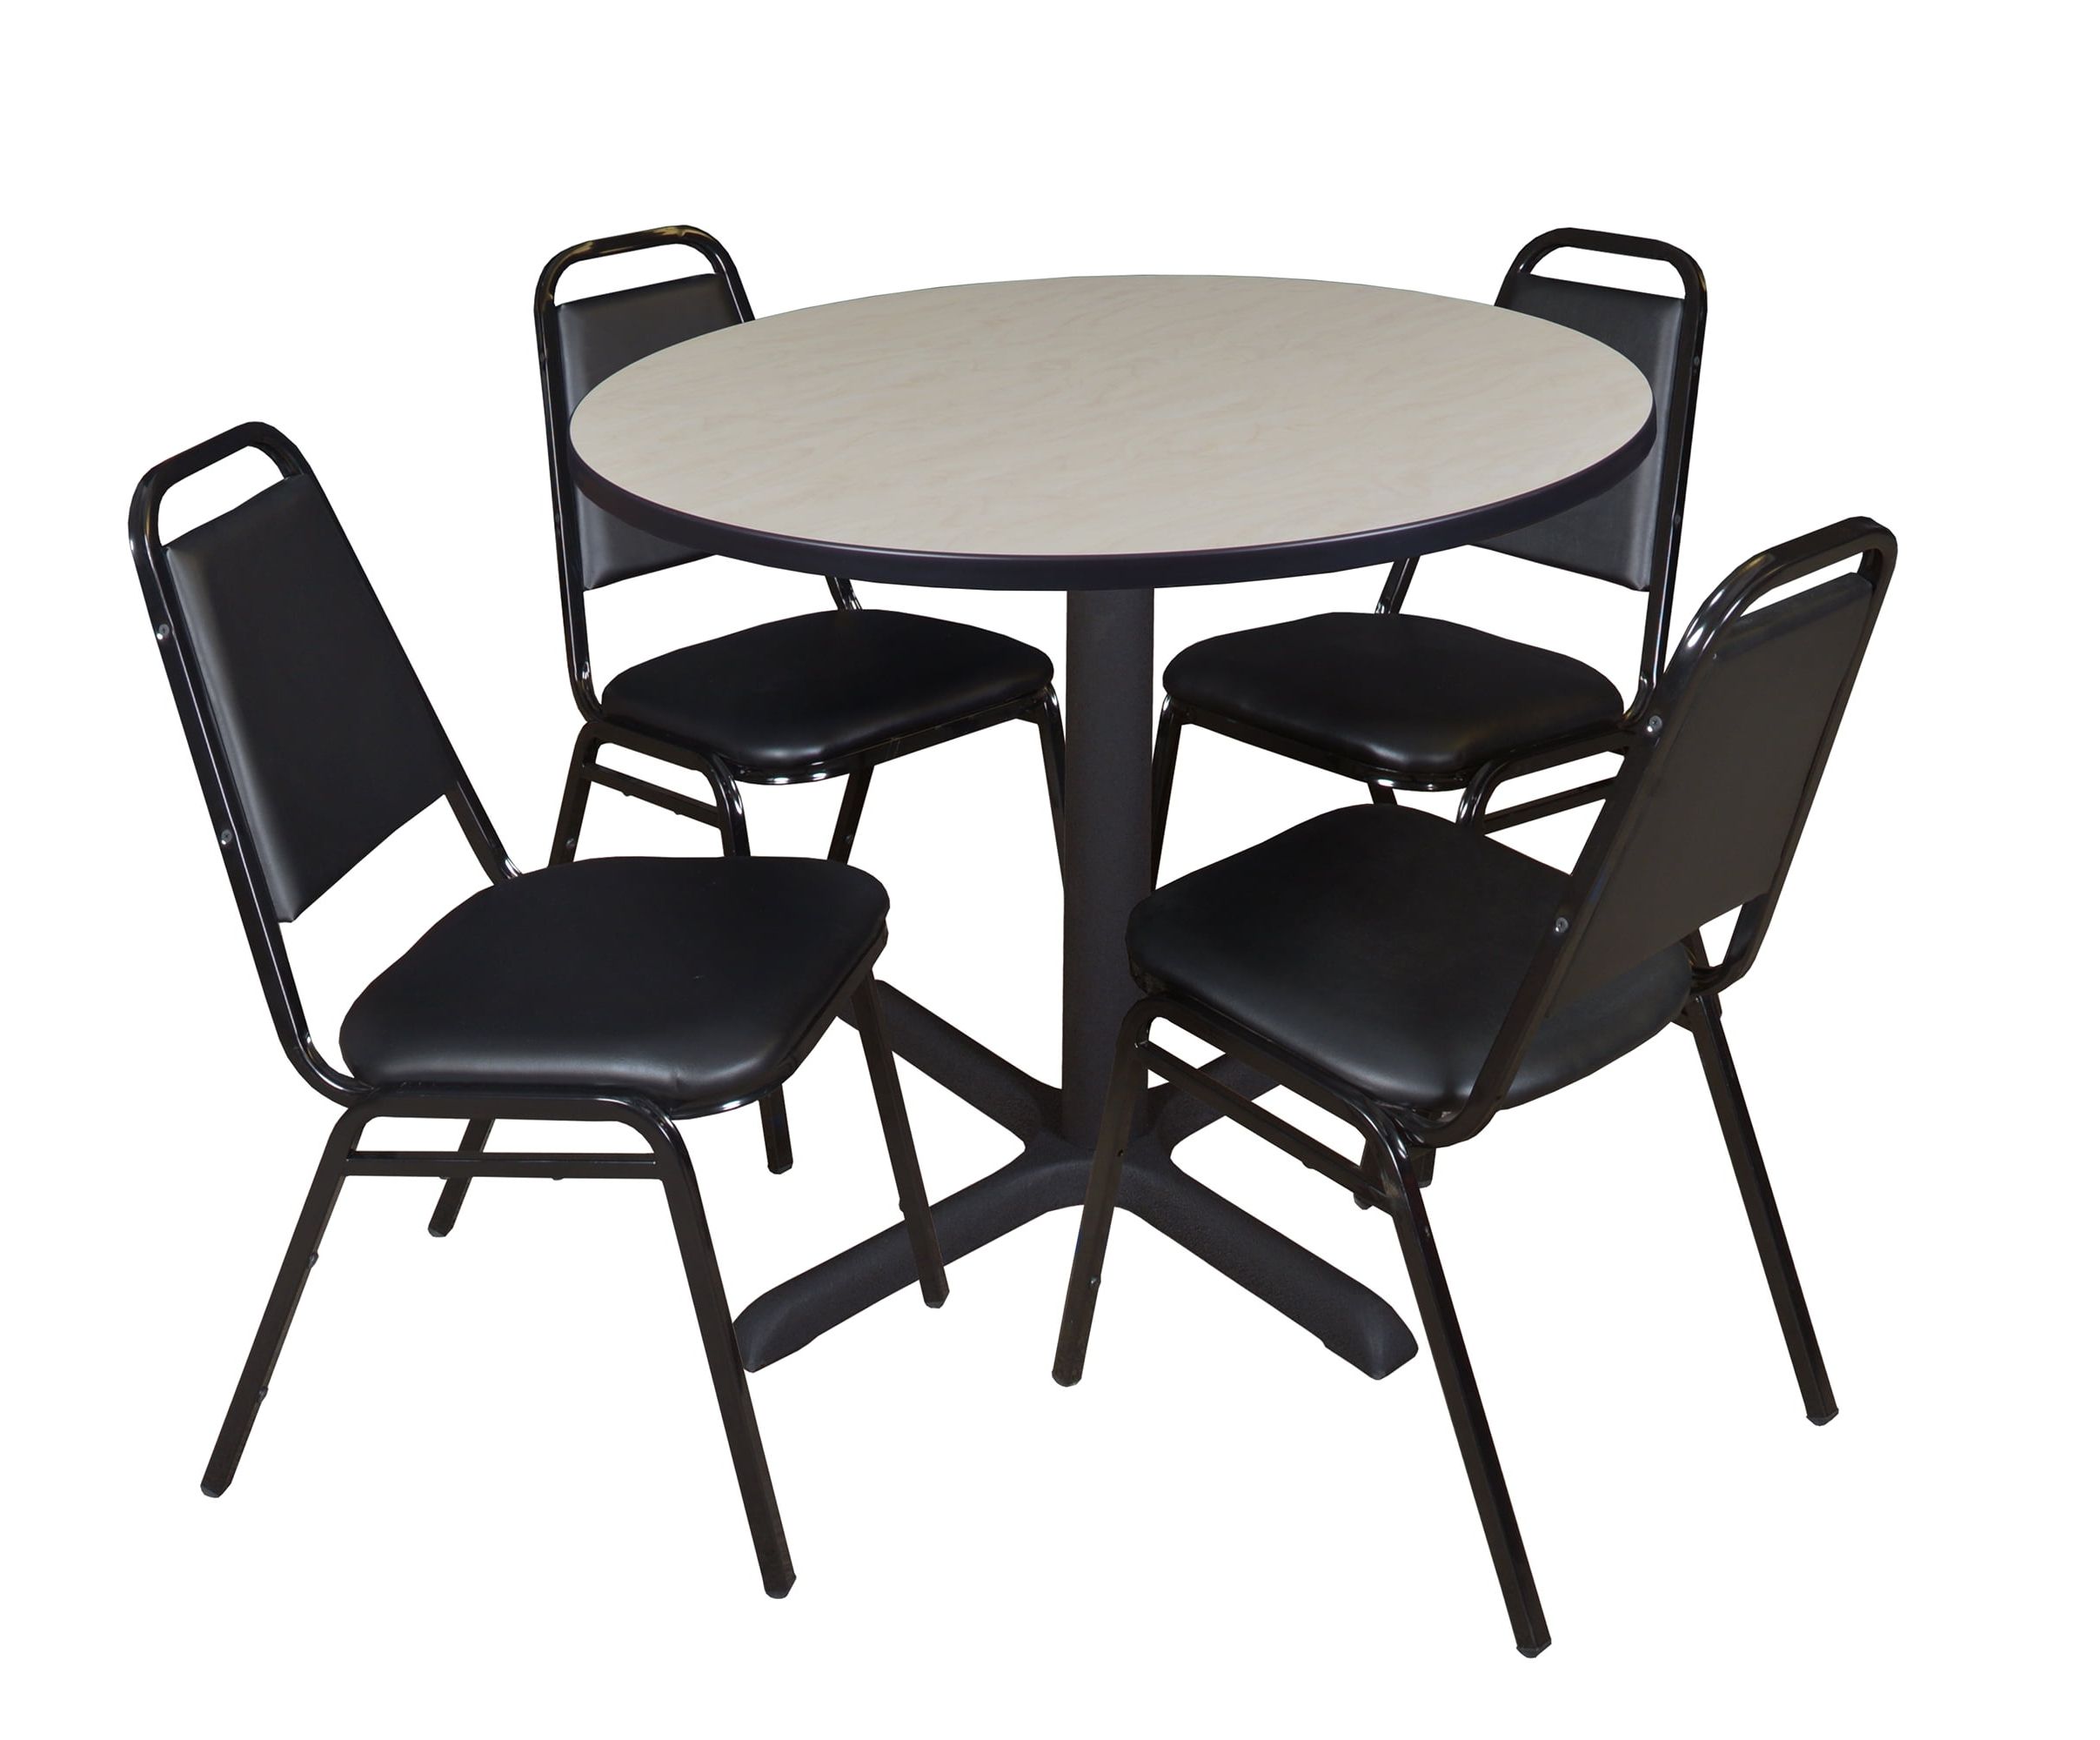 Regency Cain Round Breakroom Table With 4 Stackable Restaurant Chairs Pertaining To Regency Cain Steel Coffee Tables (Gallery 16 of 20)